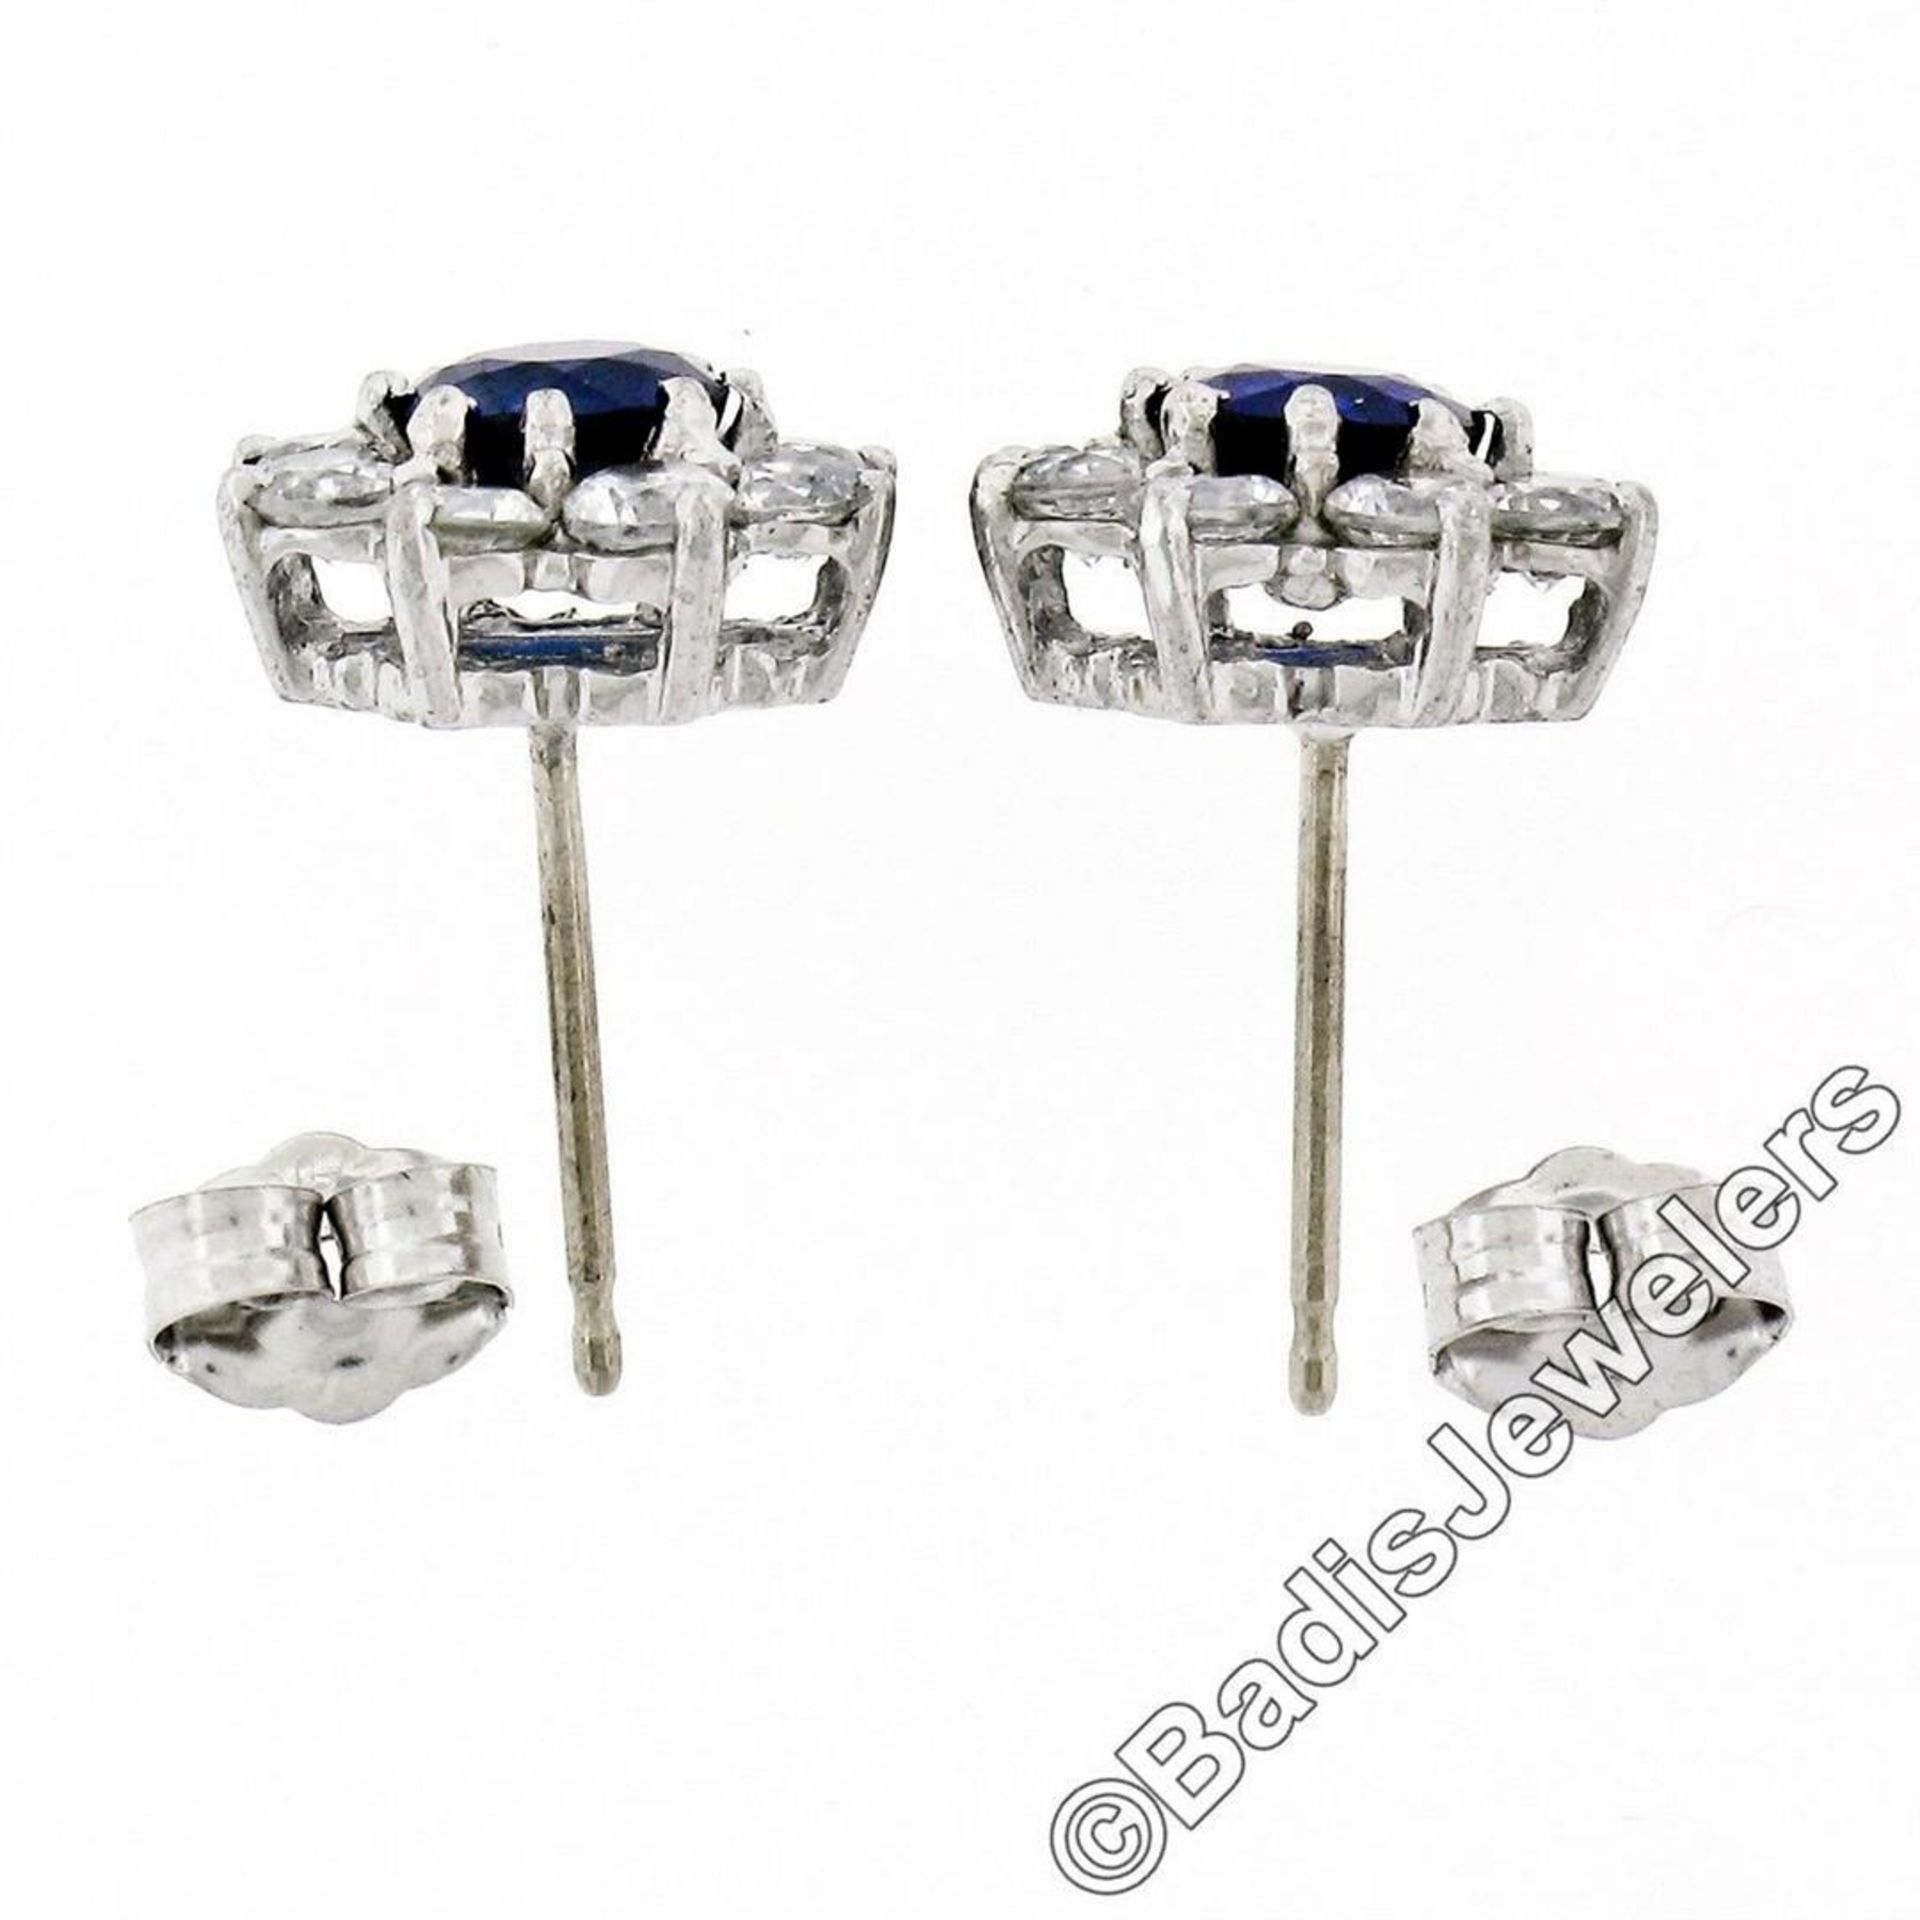 Sterling Silver Blue Crystal & CZ Halo Stud Earrings w/ 14kt White Gold Posts - Image 3 of 5